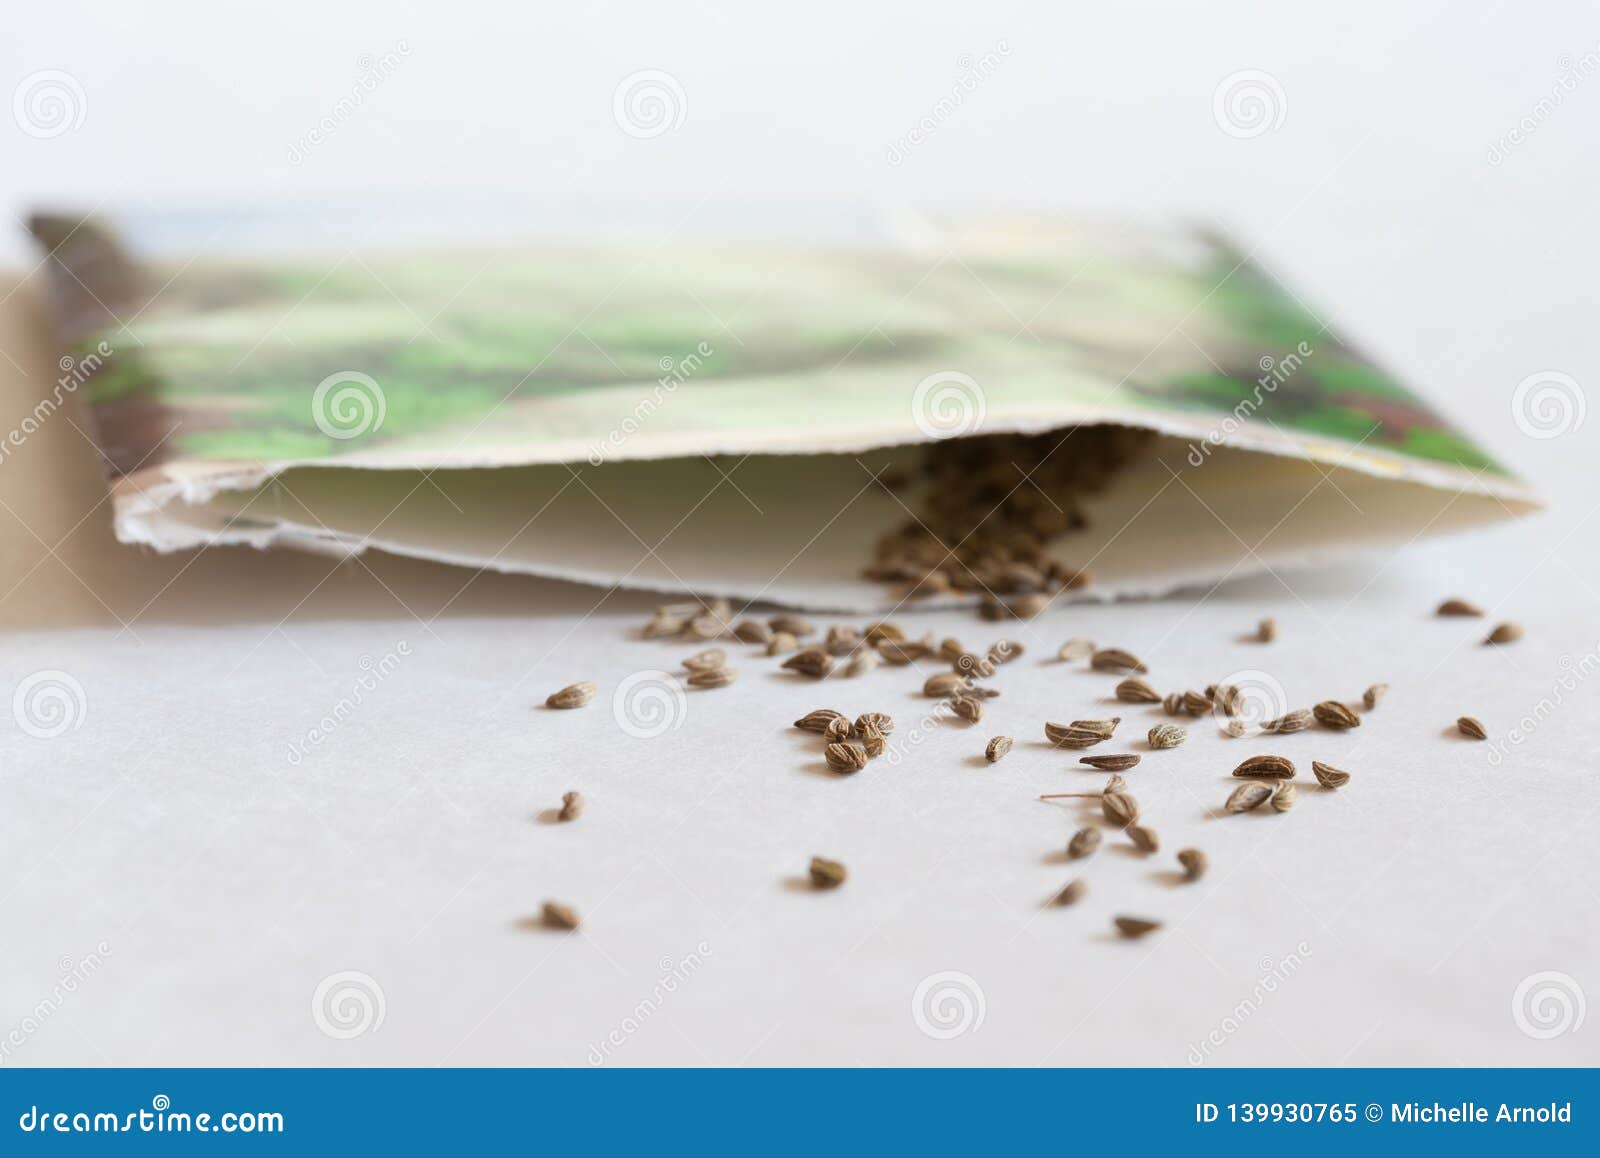 Parsley Seeds Spilled From A Seed Packet Stock Image - Image of spilling, s...